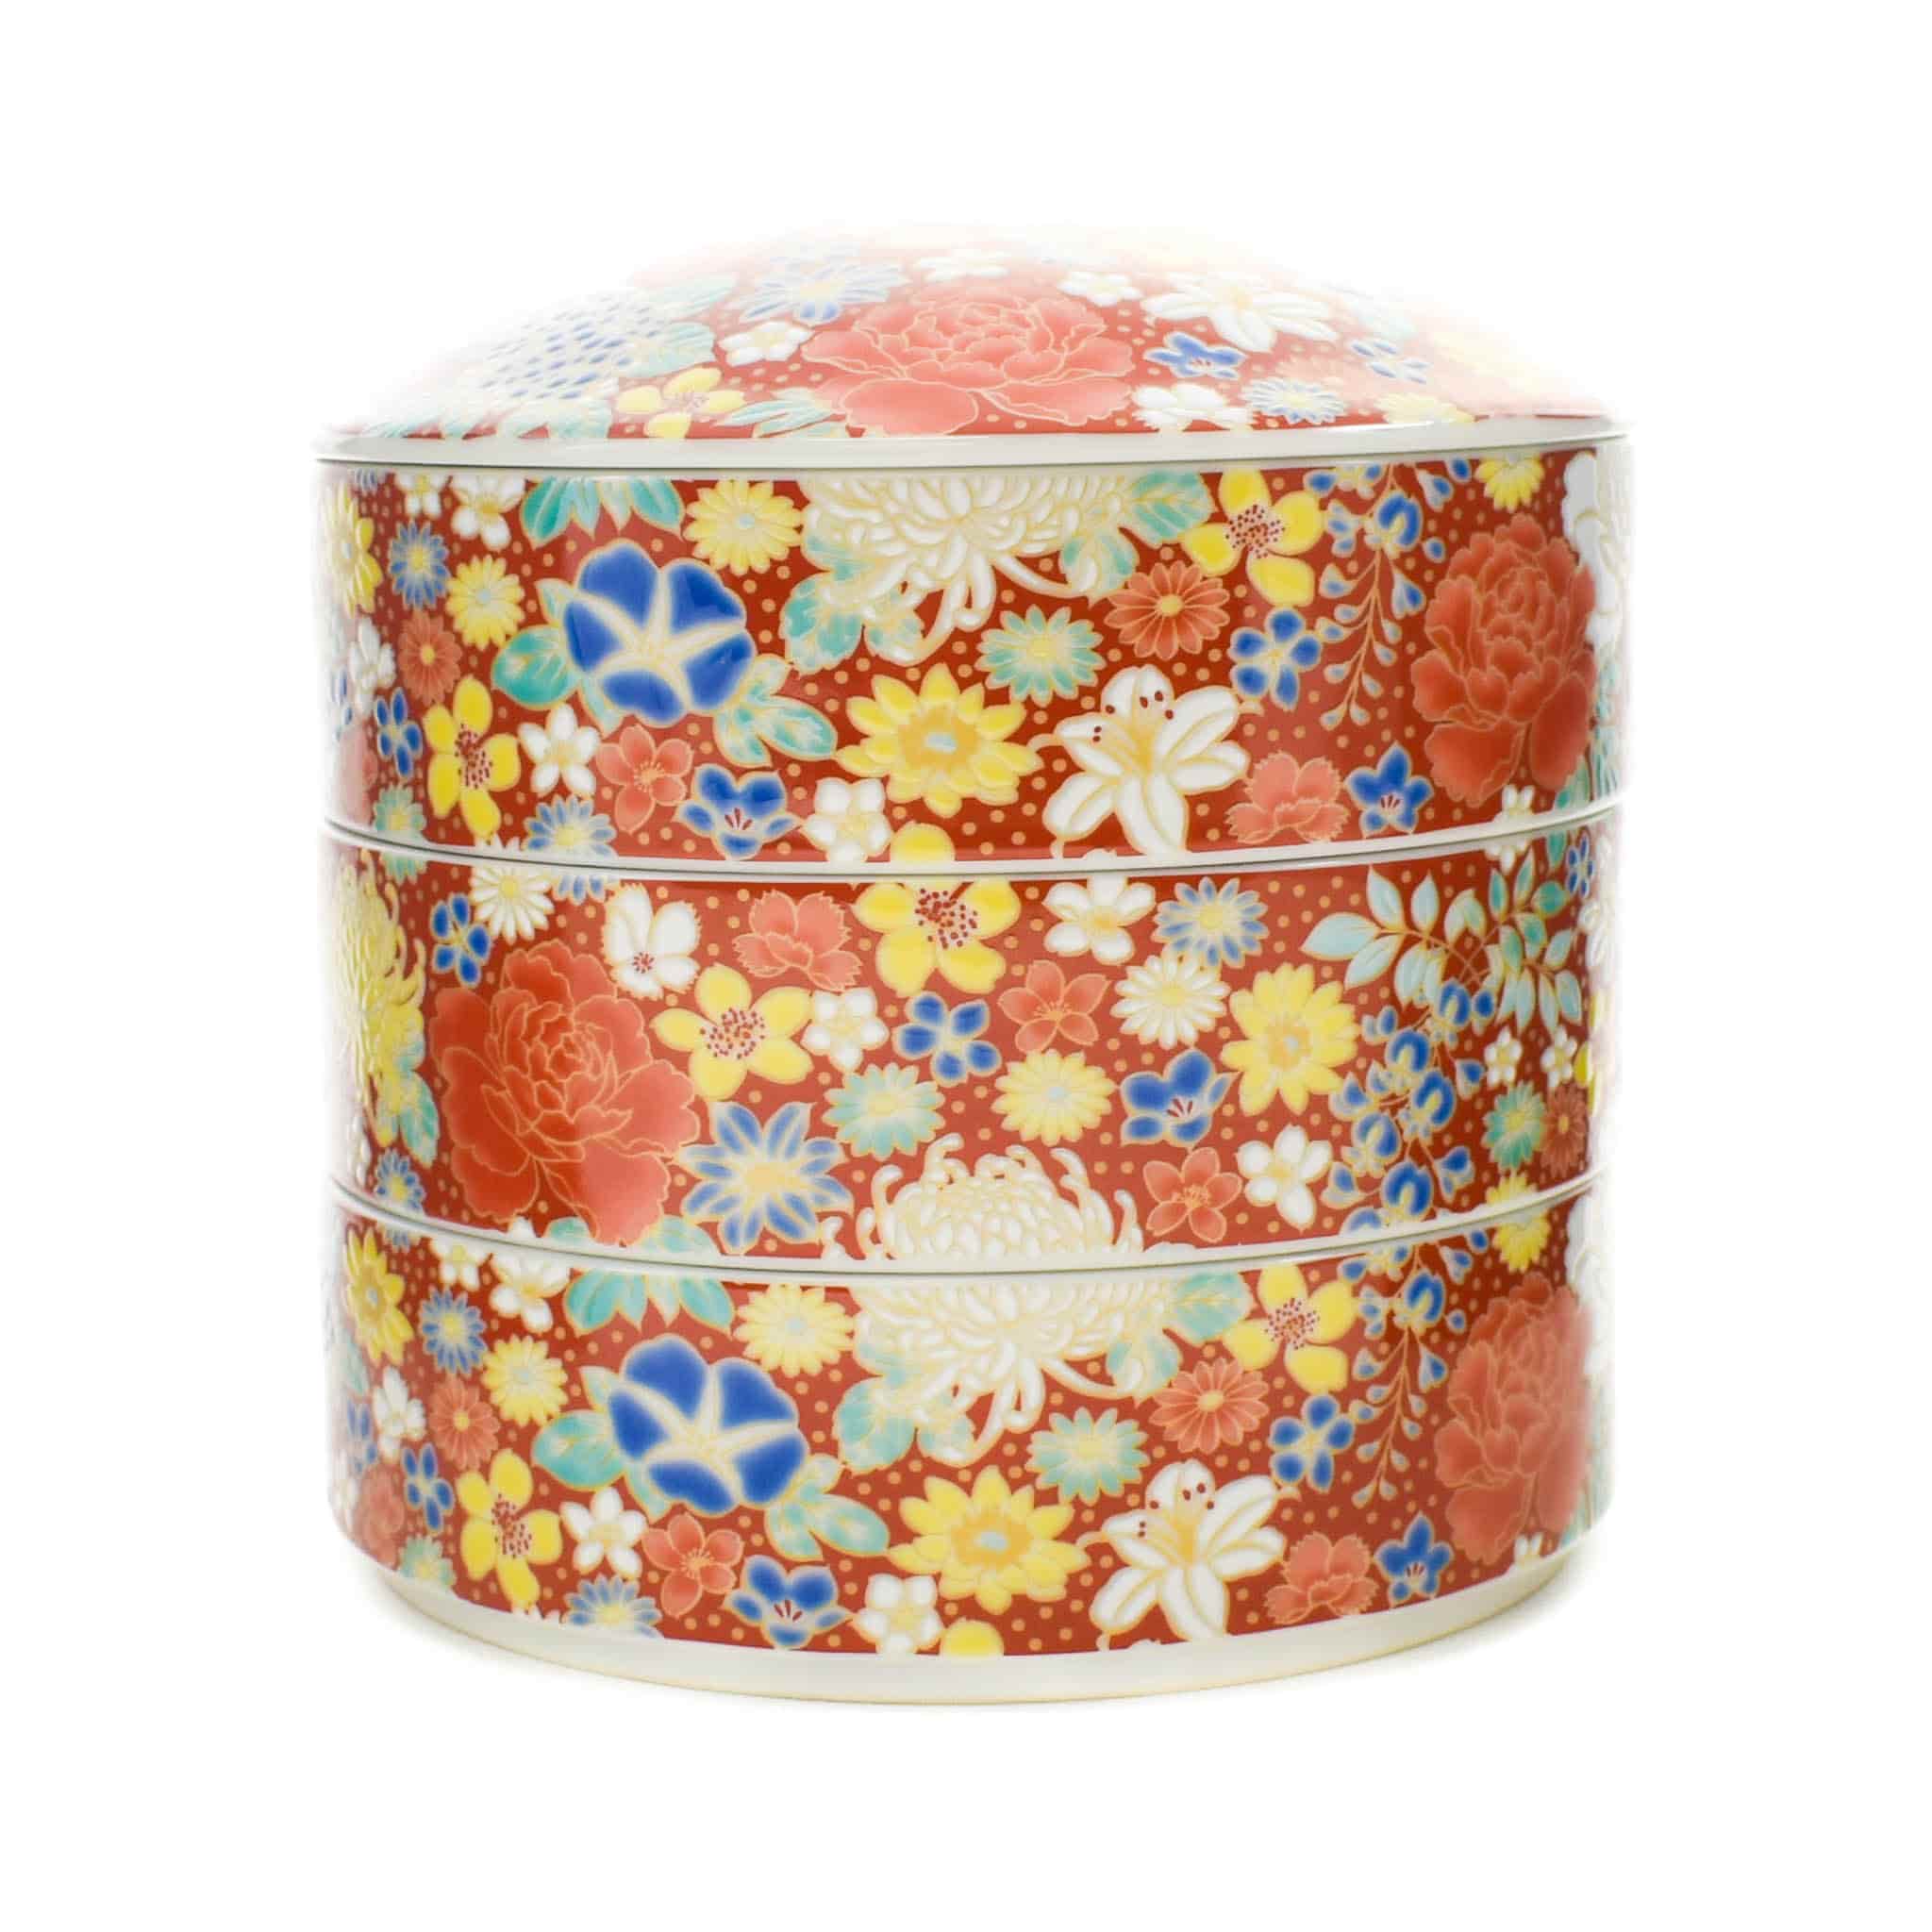 Seikou Porcelain Red Floral Motif Sweets Container, 3 Compartments